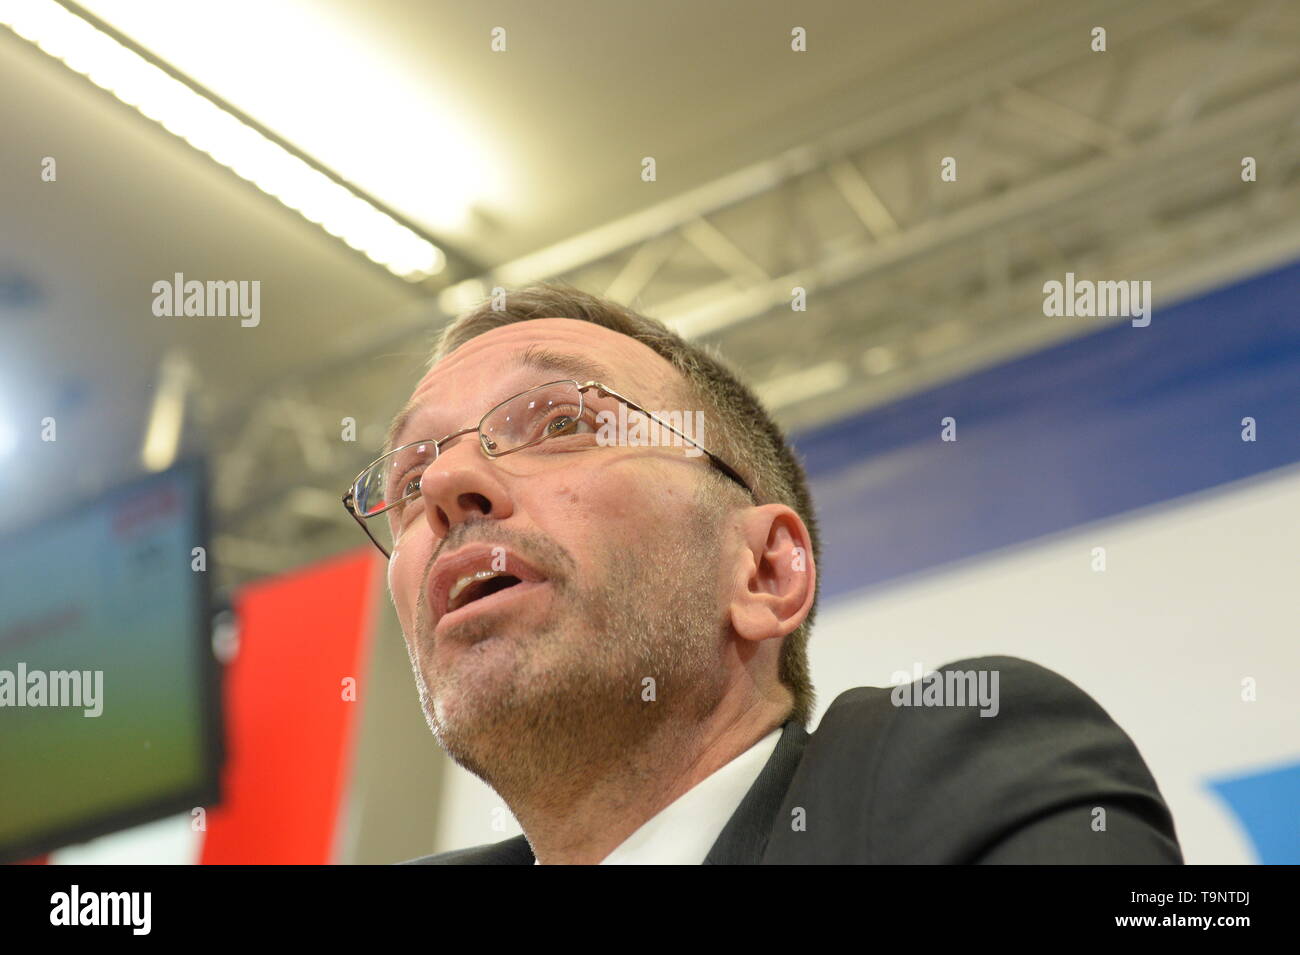 Vienna, Austria. 20th May, 2019. Press release of the FPÖ (Freedom Party of Austria).  Picture shows Interior Minister Herbert Kick( FPÖ). Credit: Franz Perc/Alamy Live News Stock Photo